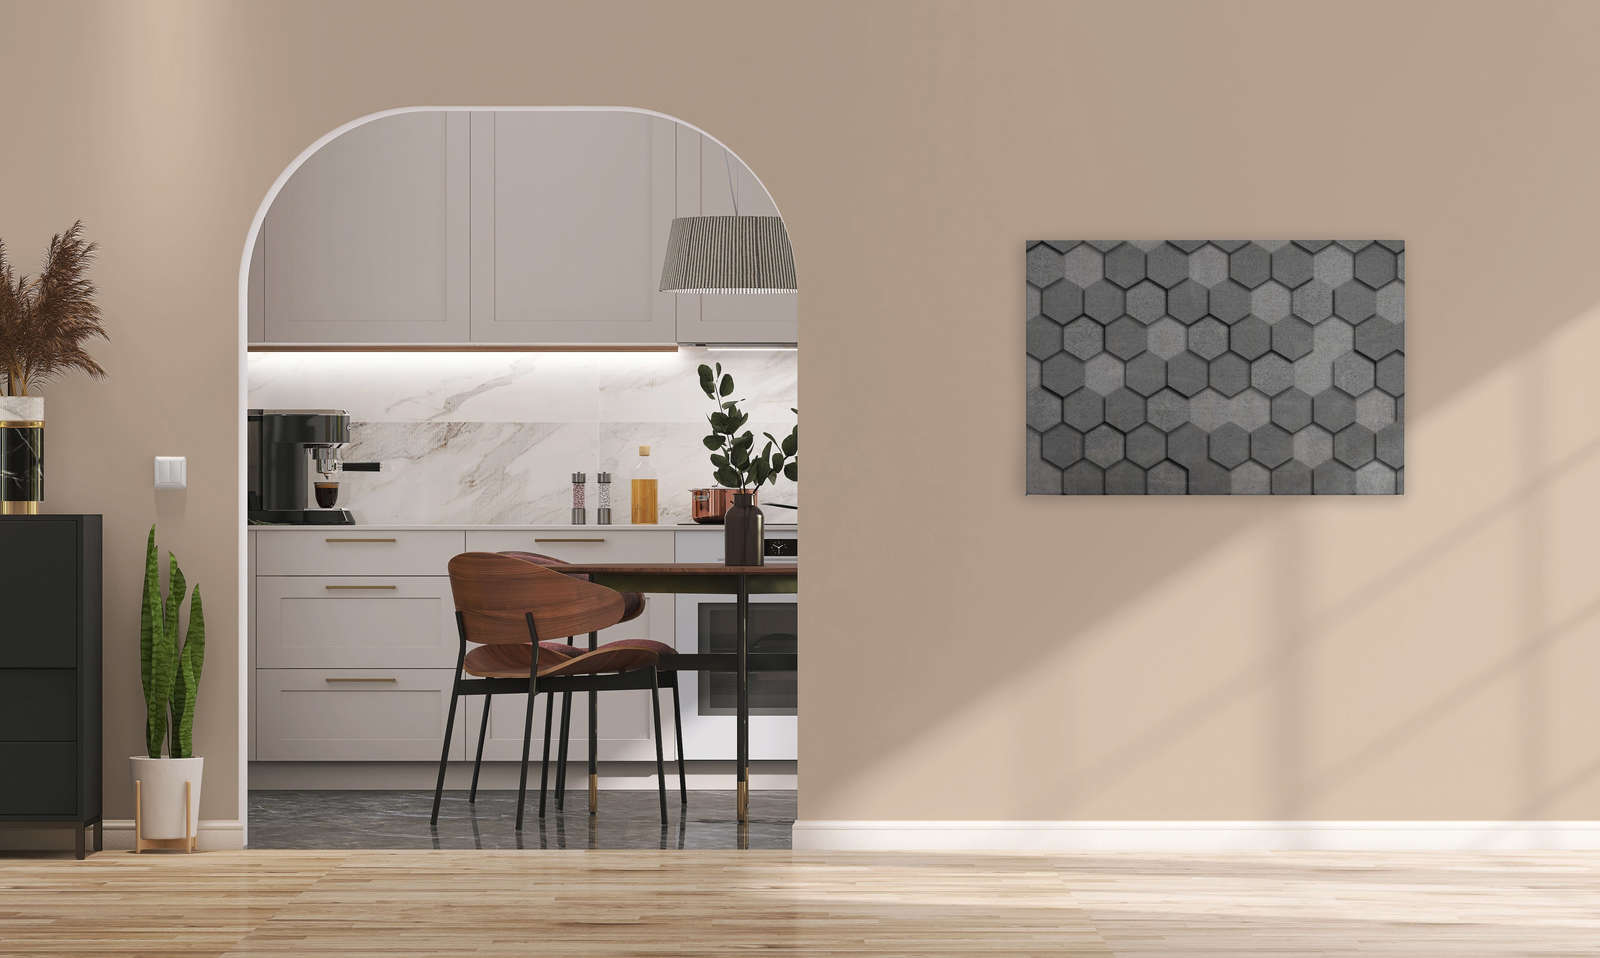             Canvas painting with geometric tiles hexagonal 3D look | grey, silver - 0.90 m x 0.60 m
        